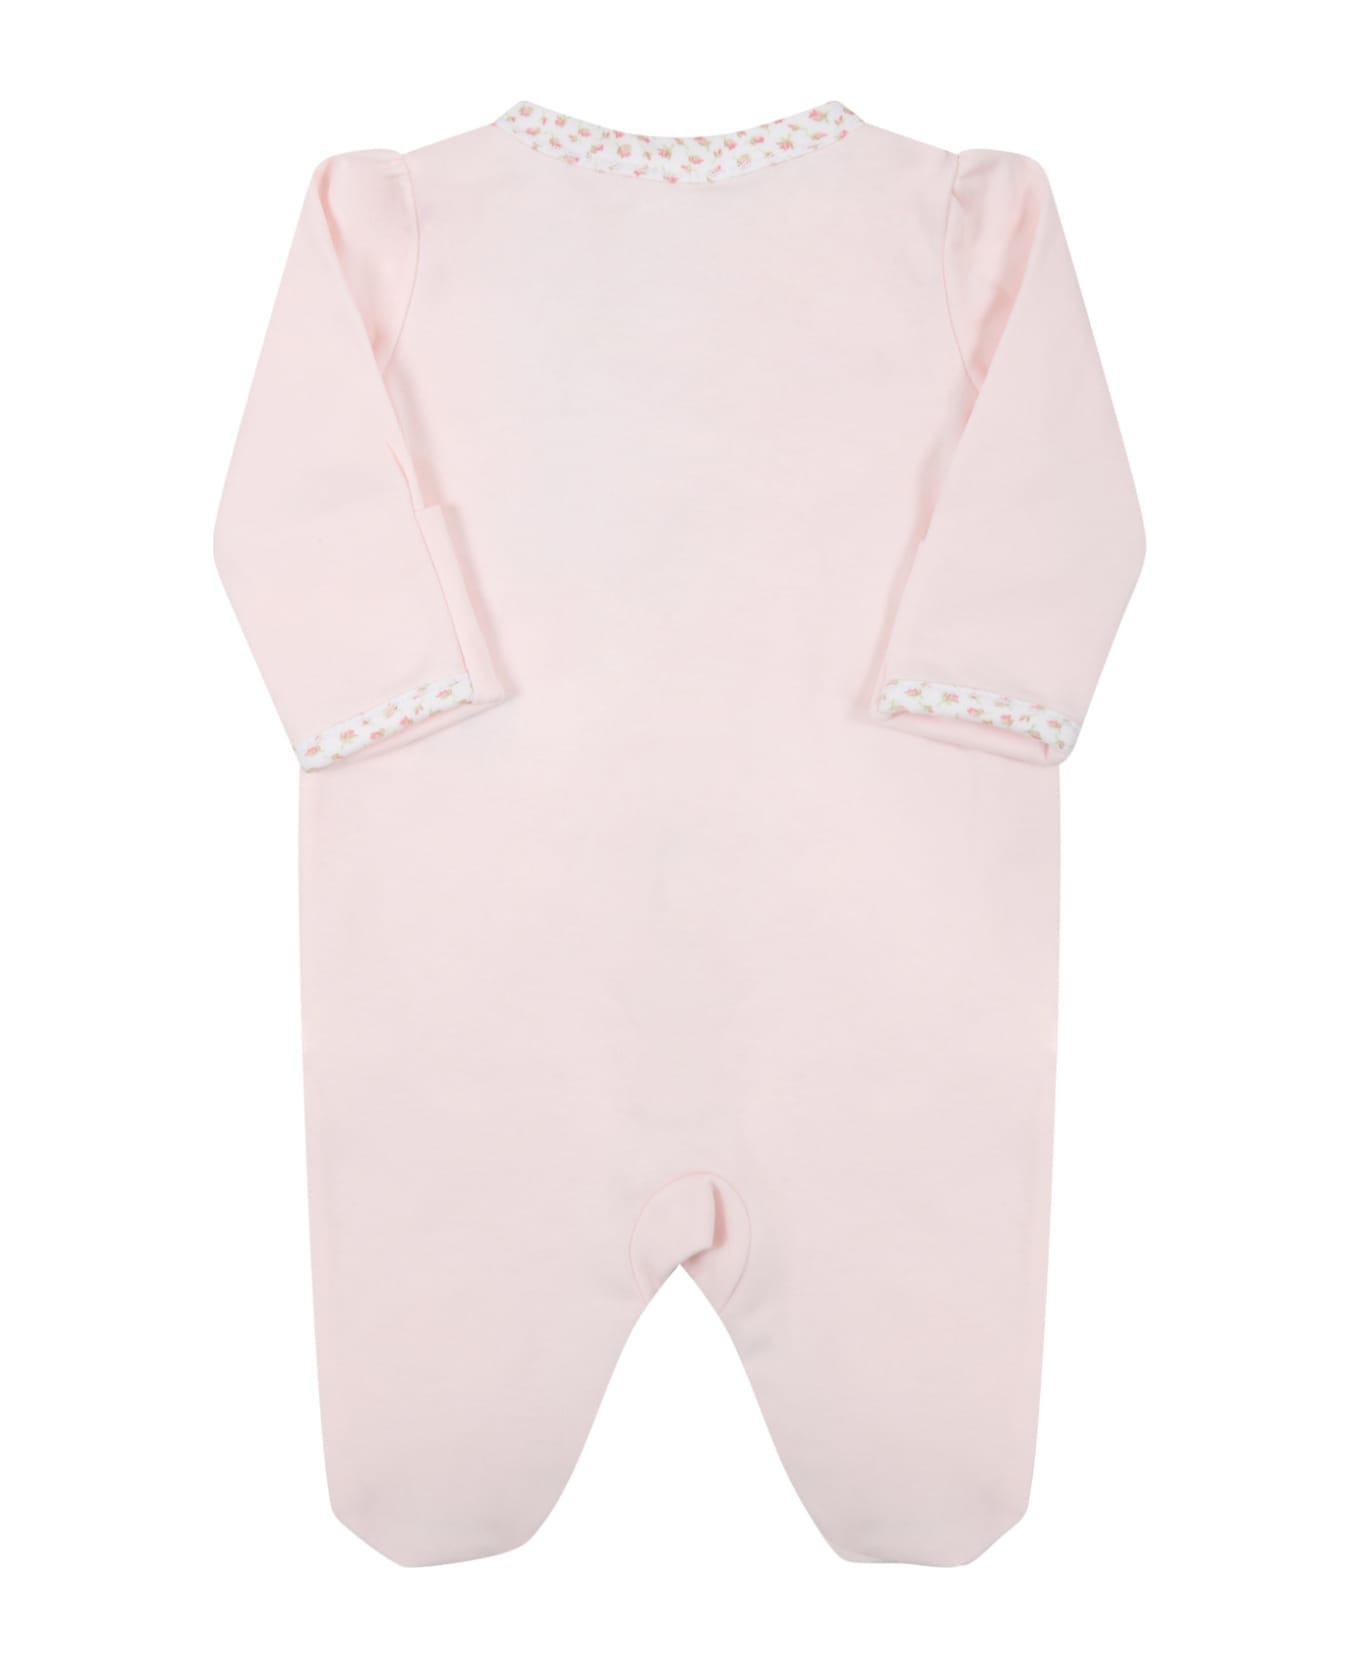 Ralph Lauren Pink Babygrow For Baby Girl With Roses - Pink